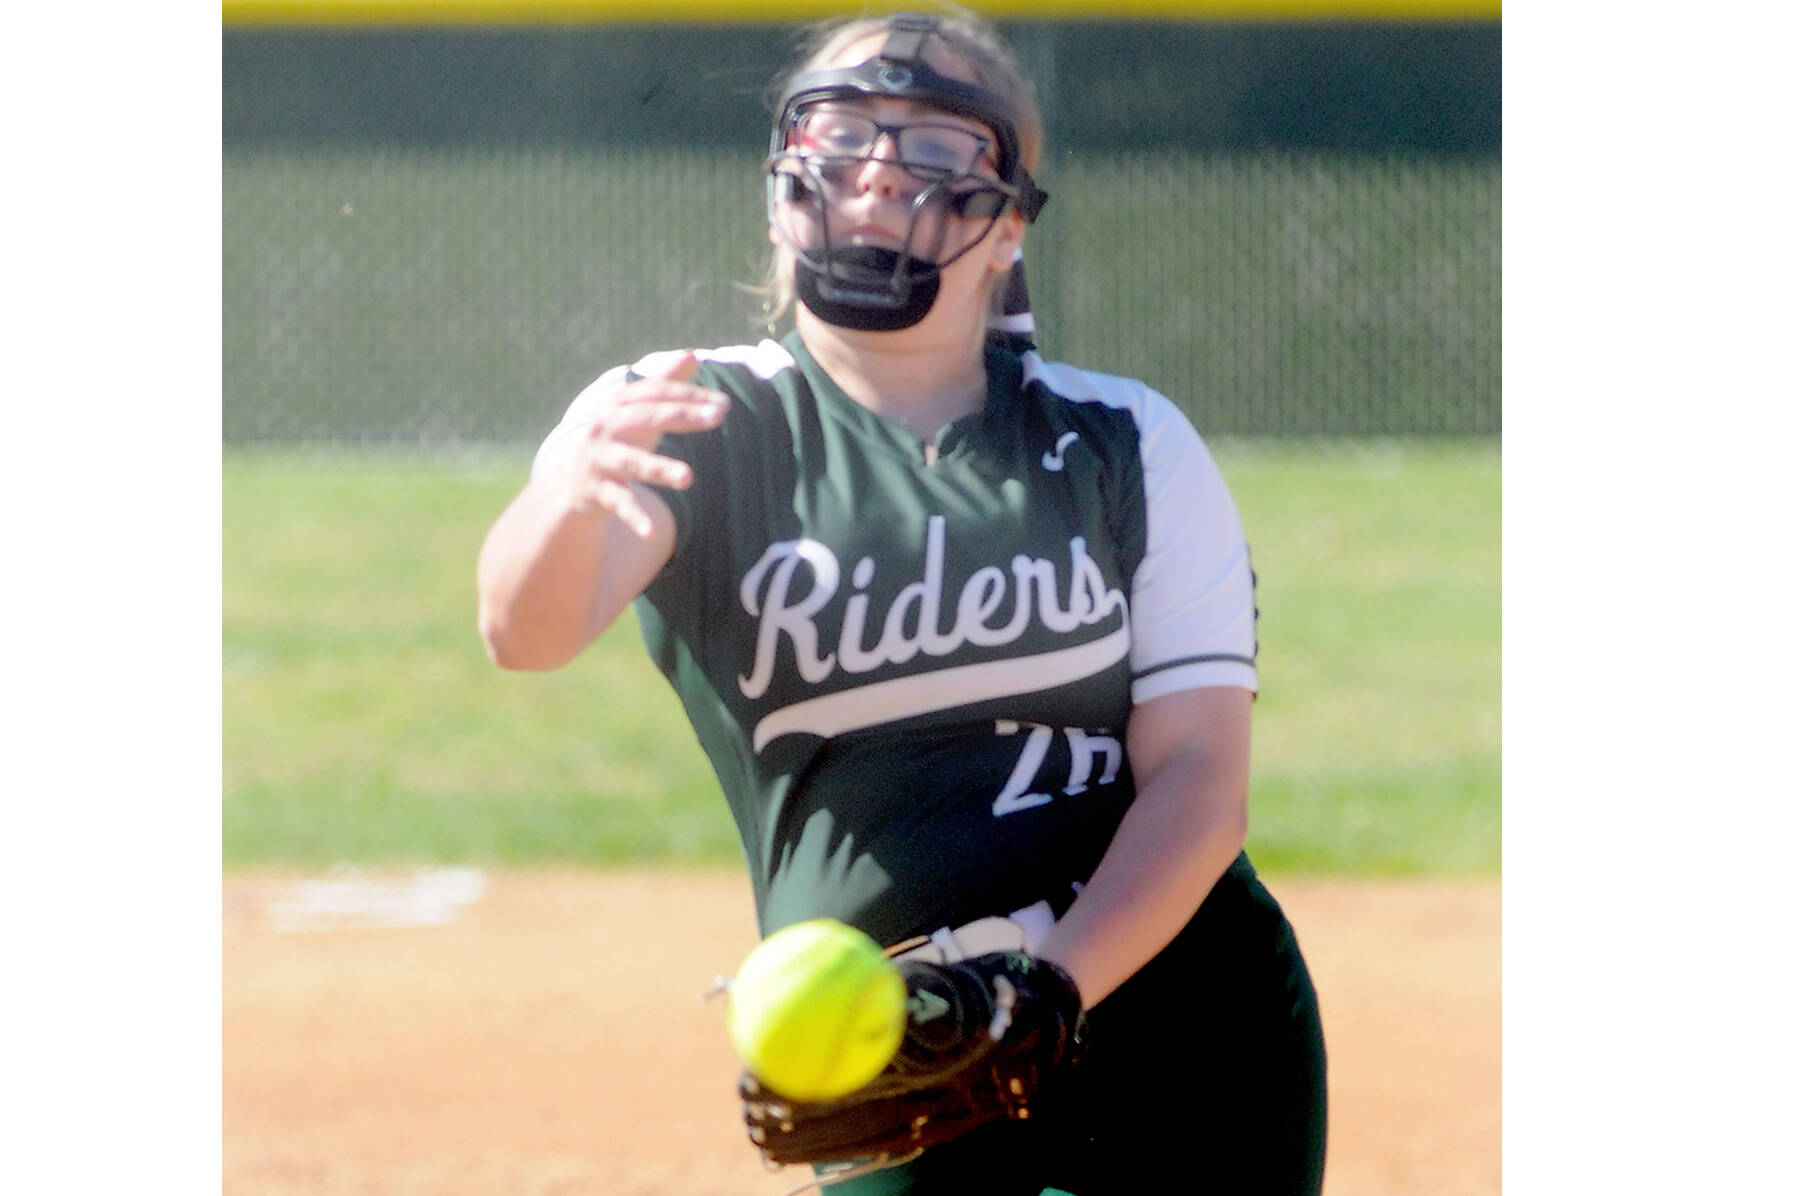 Port Angeles pitcher Cheyenne Zimmer throws in the first inning against Sequim on Friday afternoon in Port Angeles. (Keith Thorpe/Peninsula Daily News)